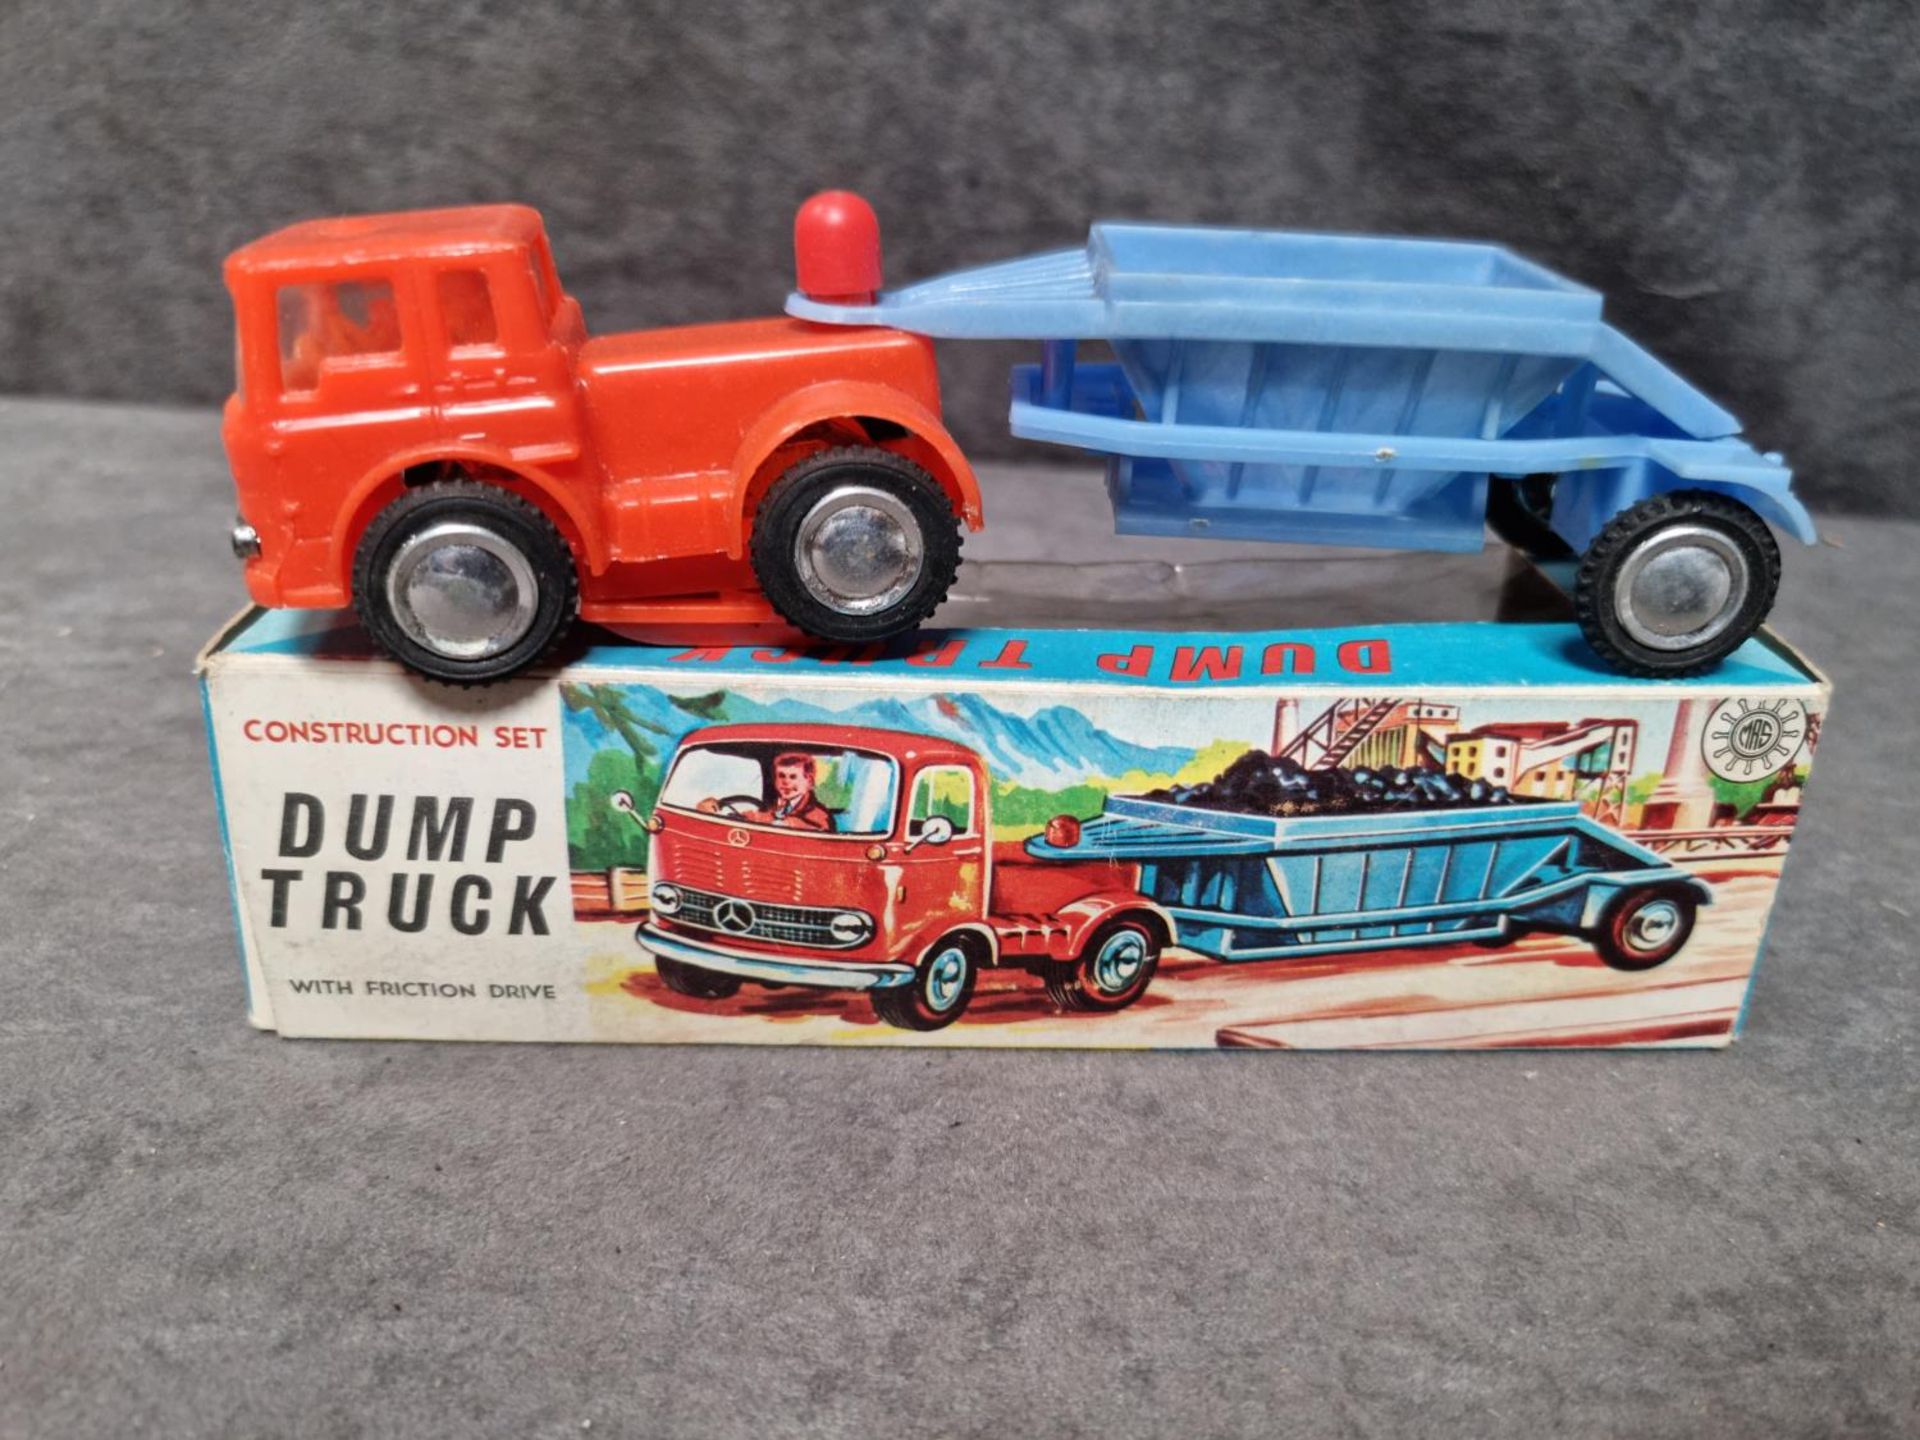 Construction Set Dump Truck With Friction Drive #1006 Made In Hong Kong - Image 2 of 2